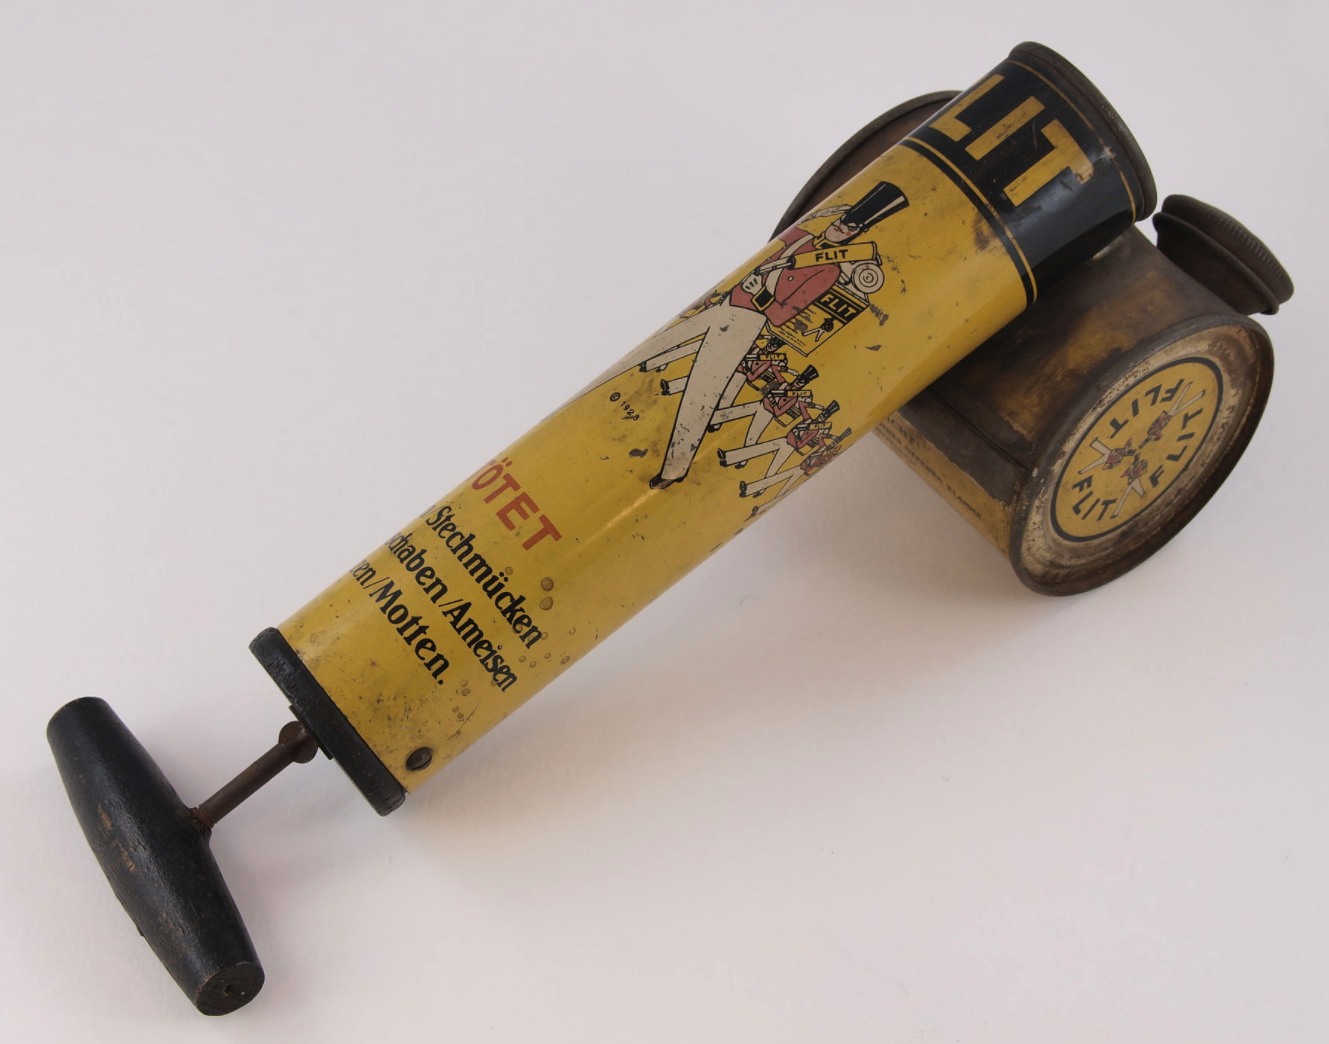 Flit gun of the type used to pump DDT powder before it was banned.